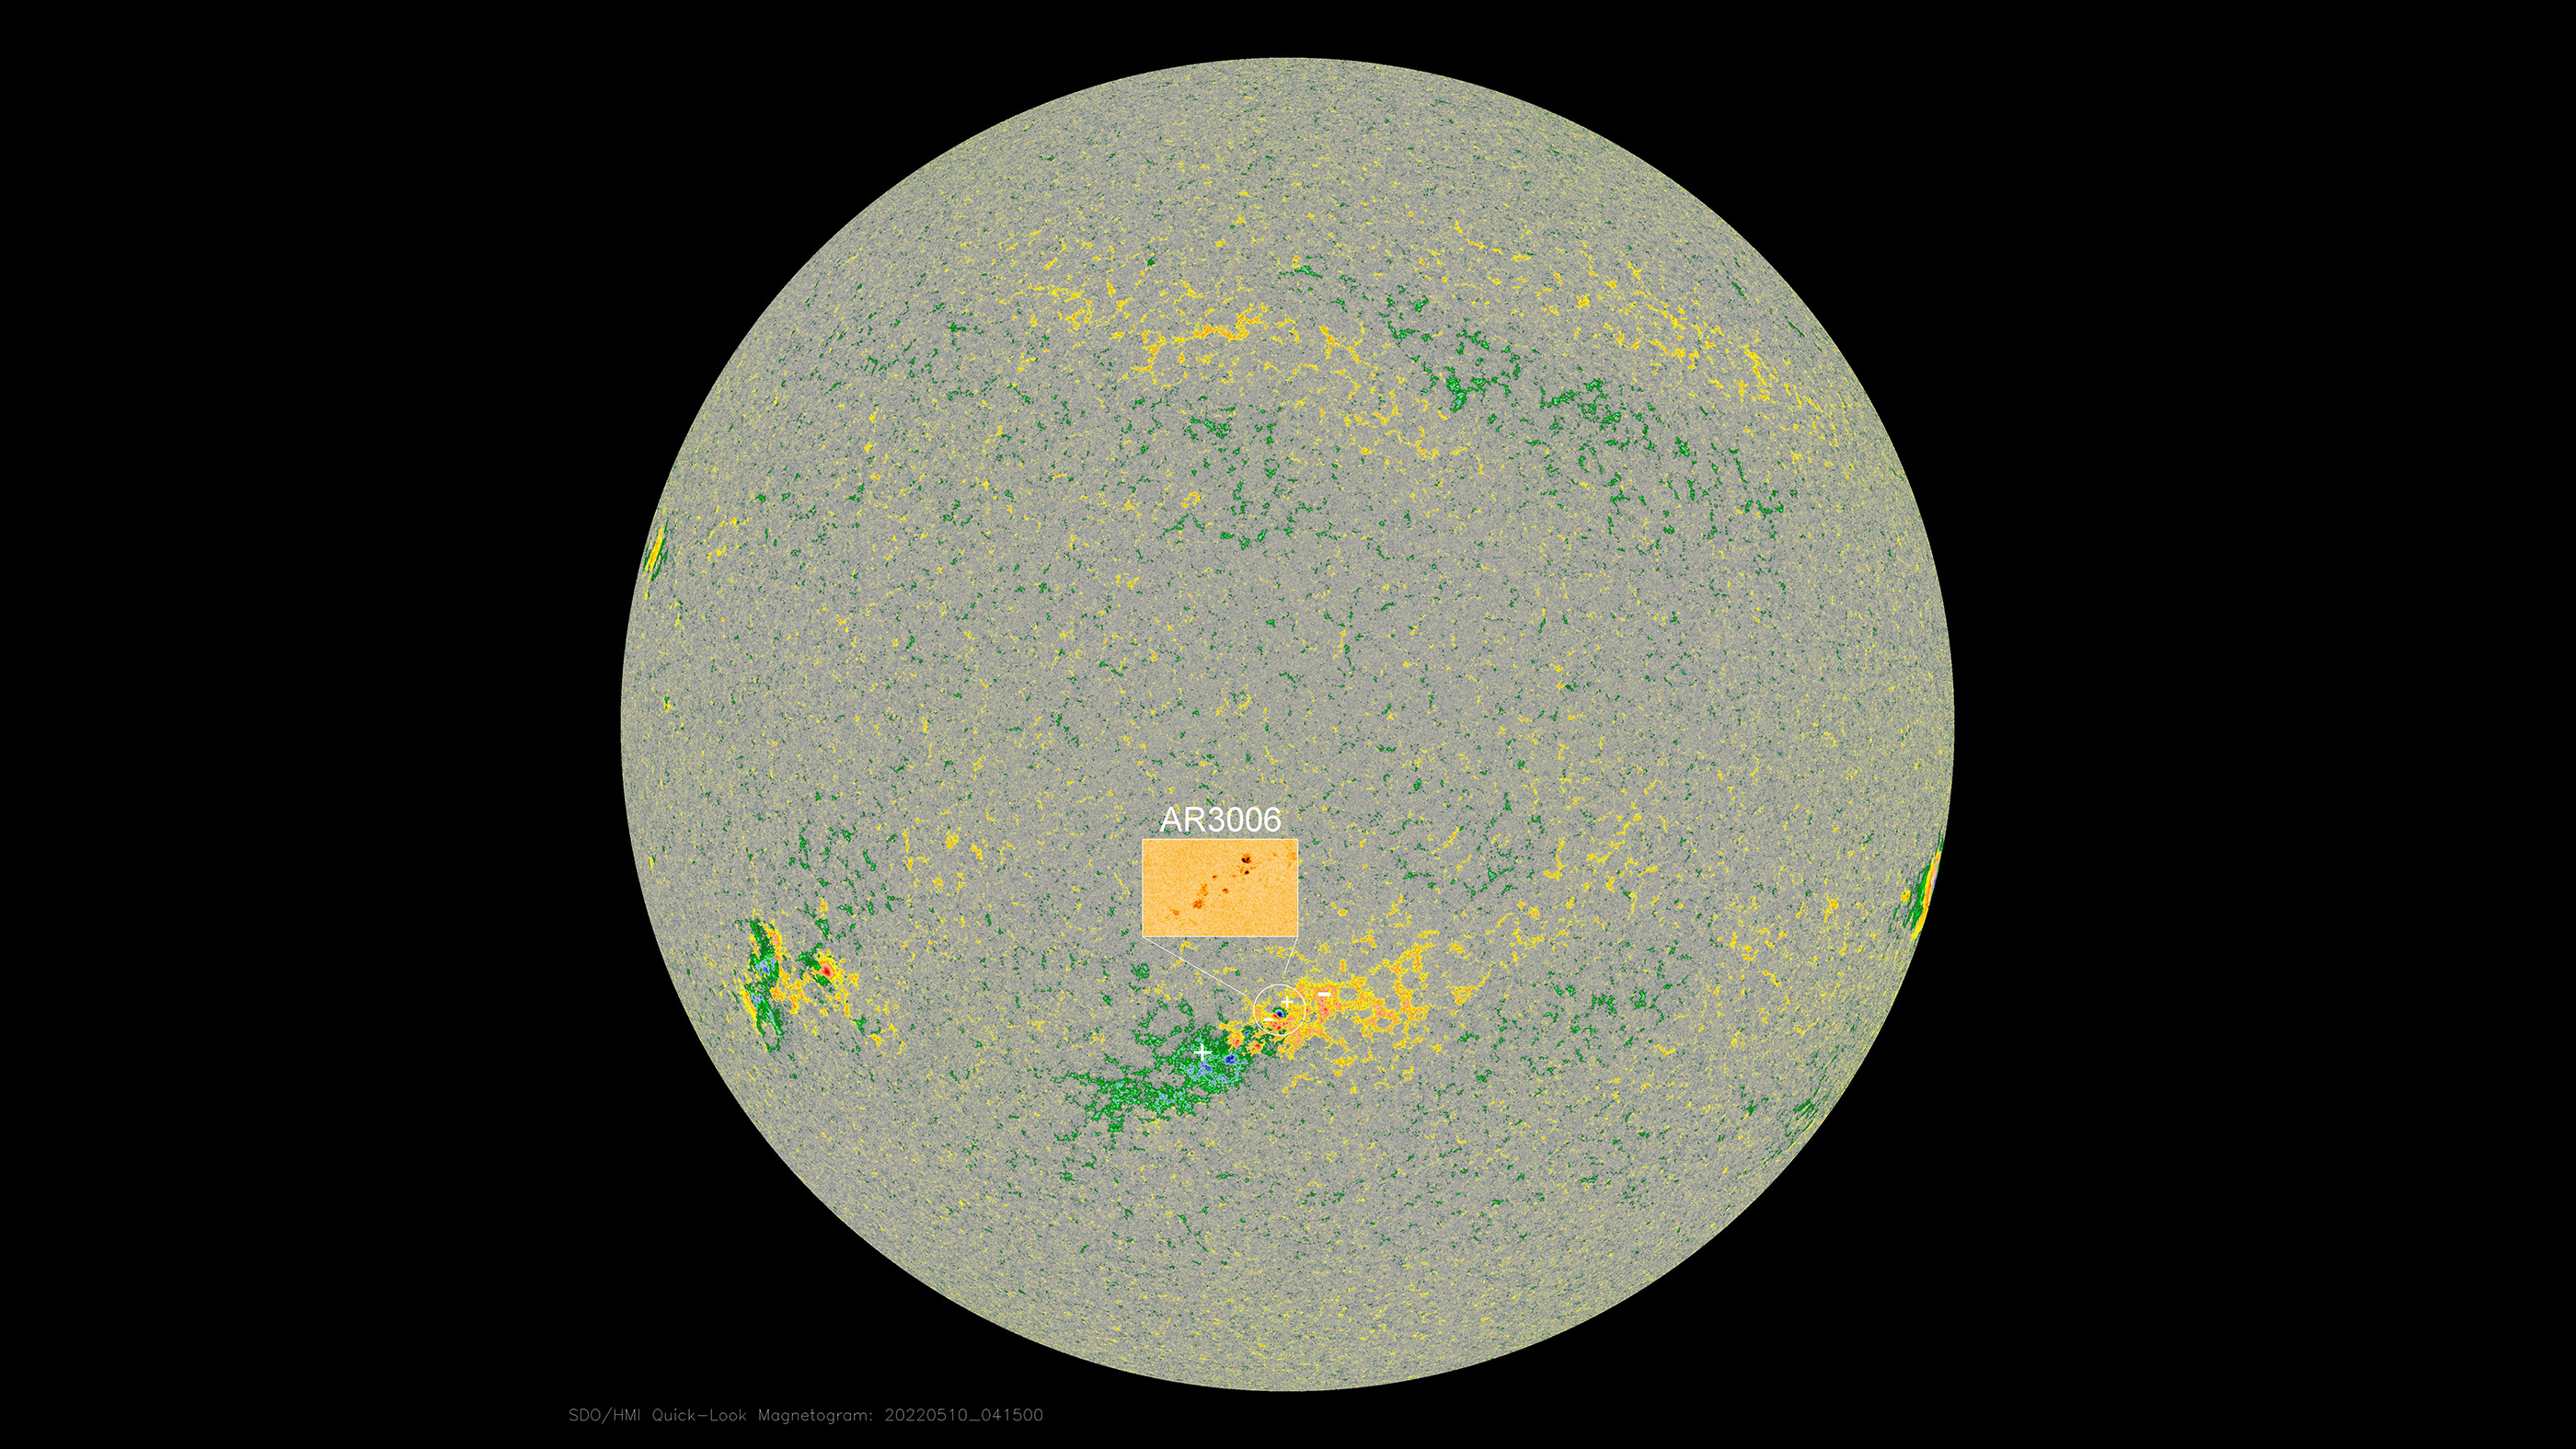 Sunspot region AR3006 was first seen a few days ago and has now rotated close to the center of the sun's visible disk, pointing almost directly at Earth.